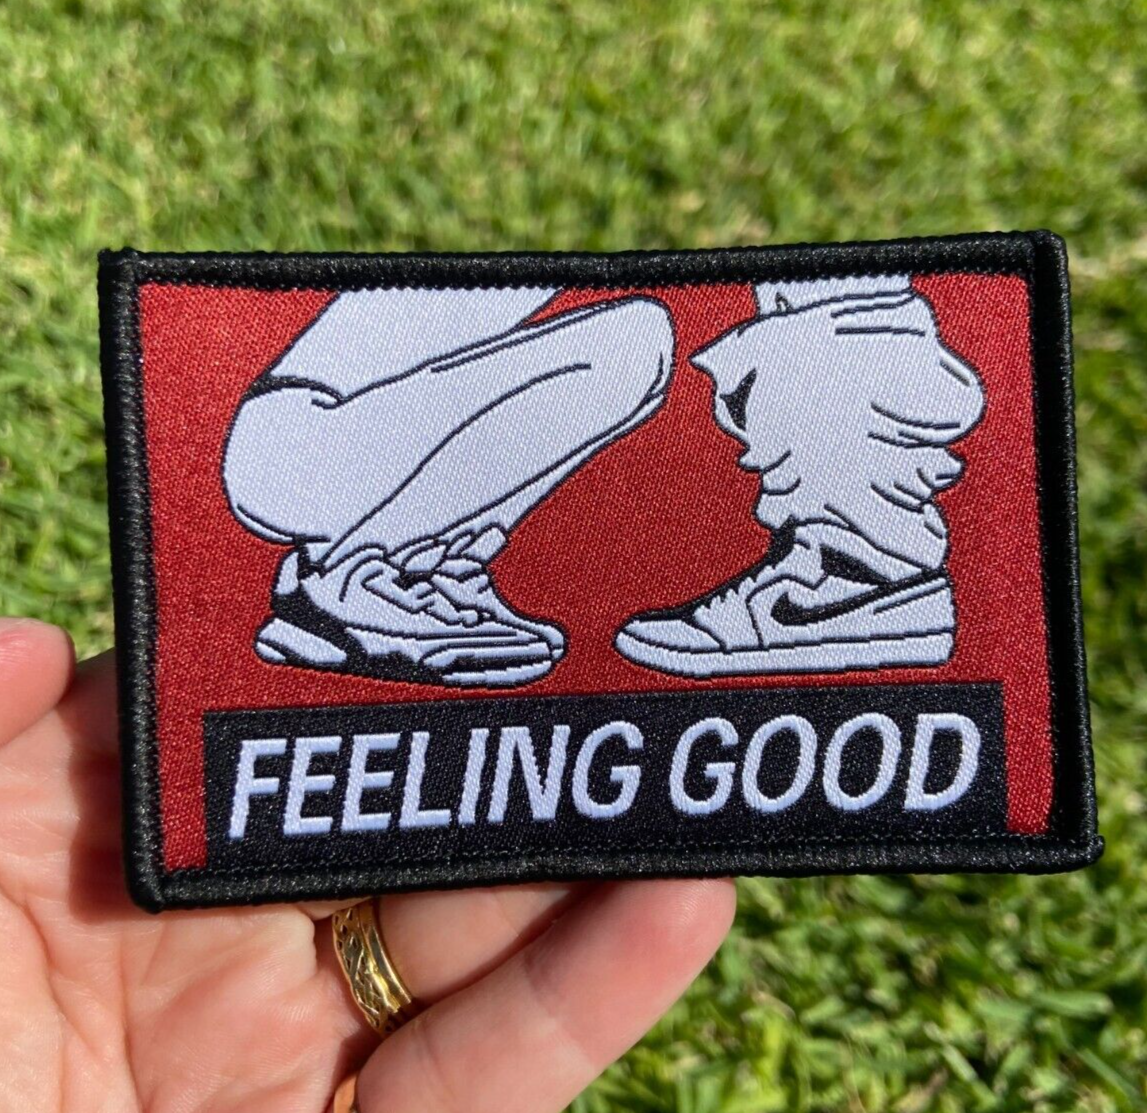 'FEELING GOOD' Patch - funny naughty 